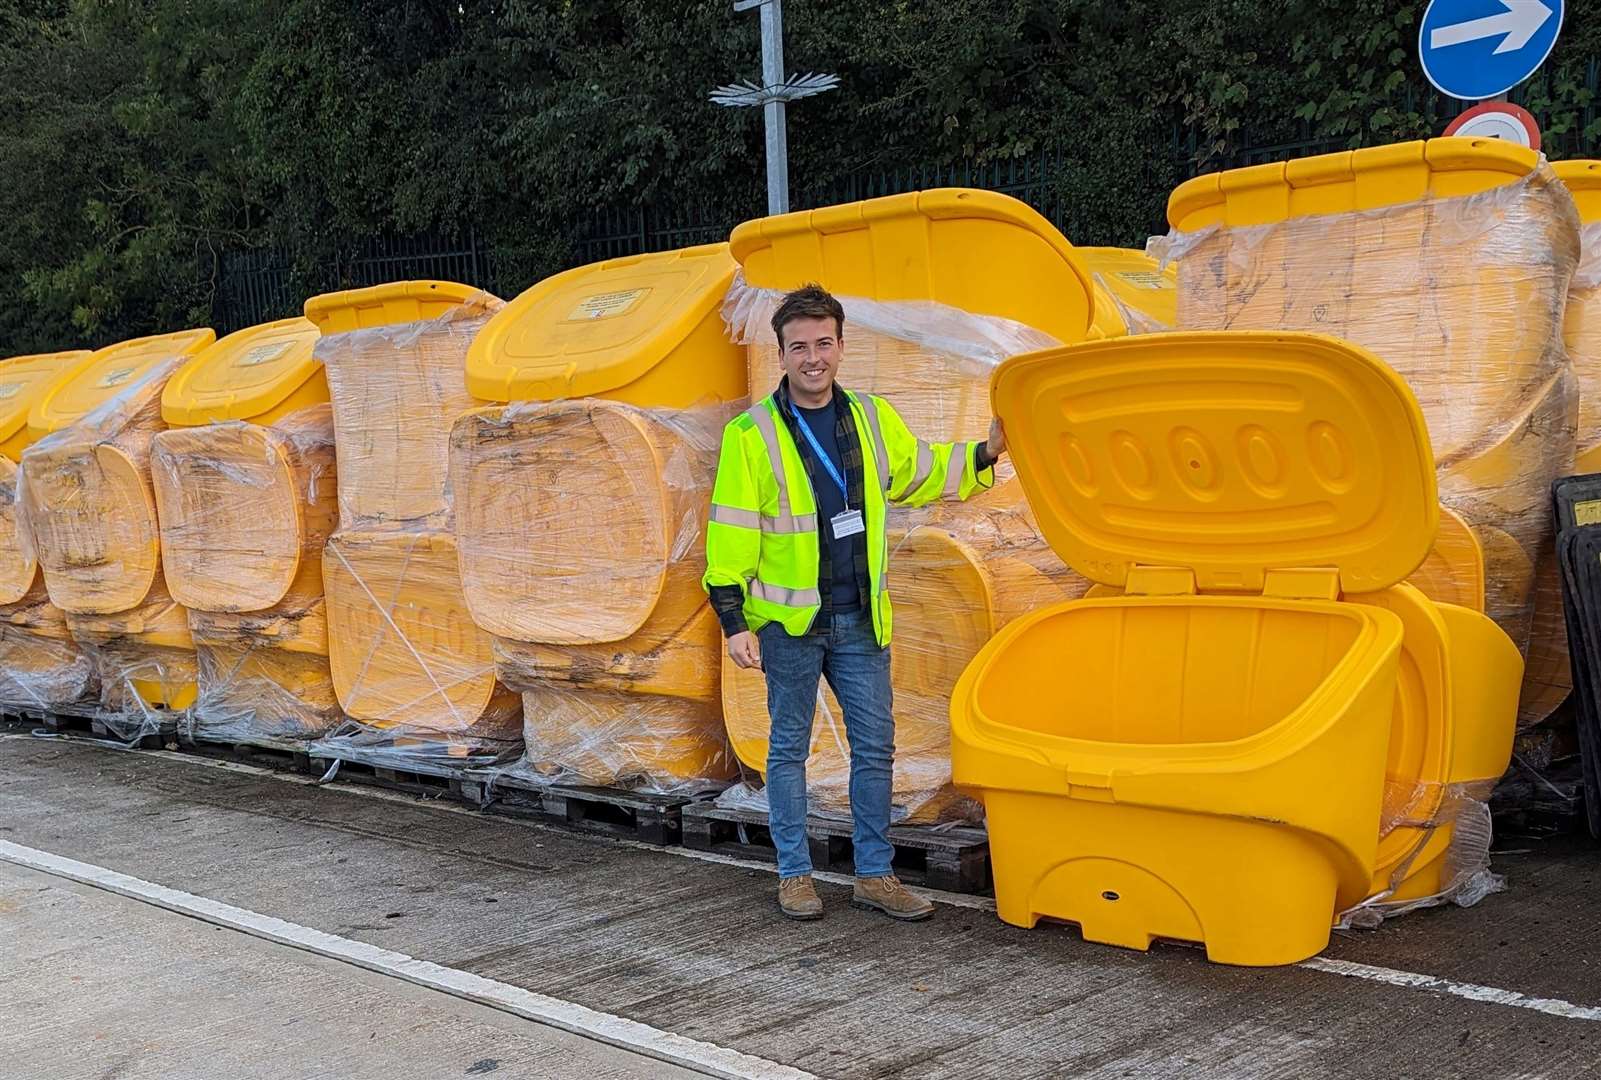 Maidstone got new grit bins thanks to the work done by Cllr Cannon